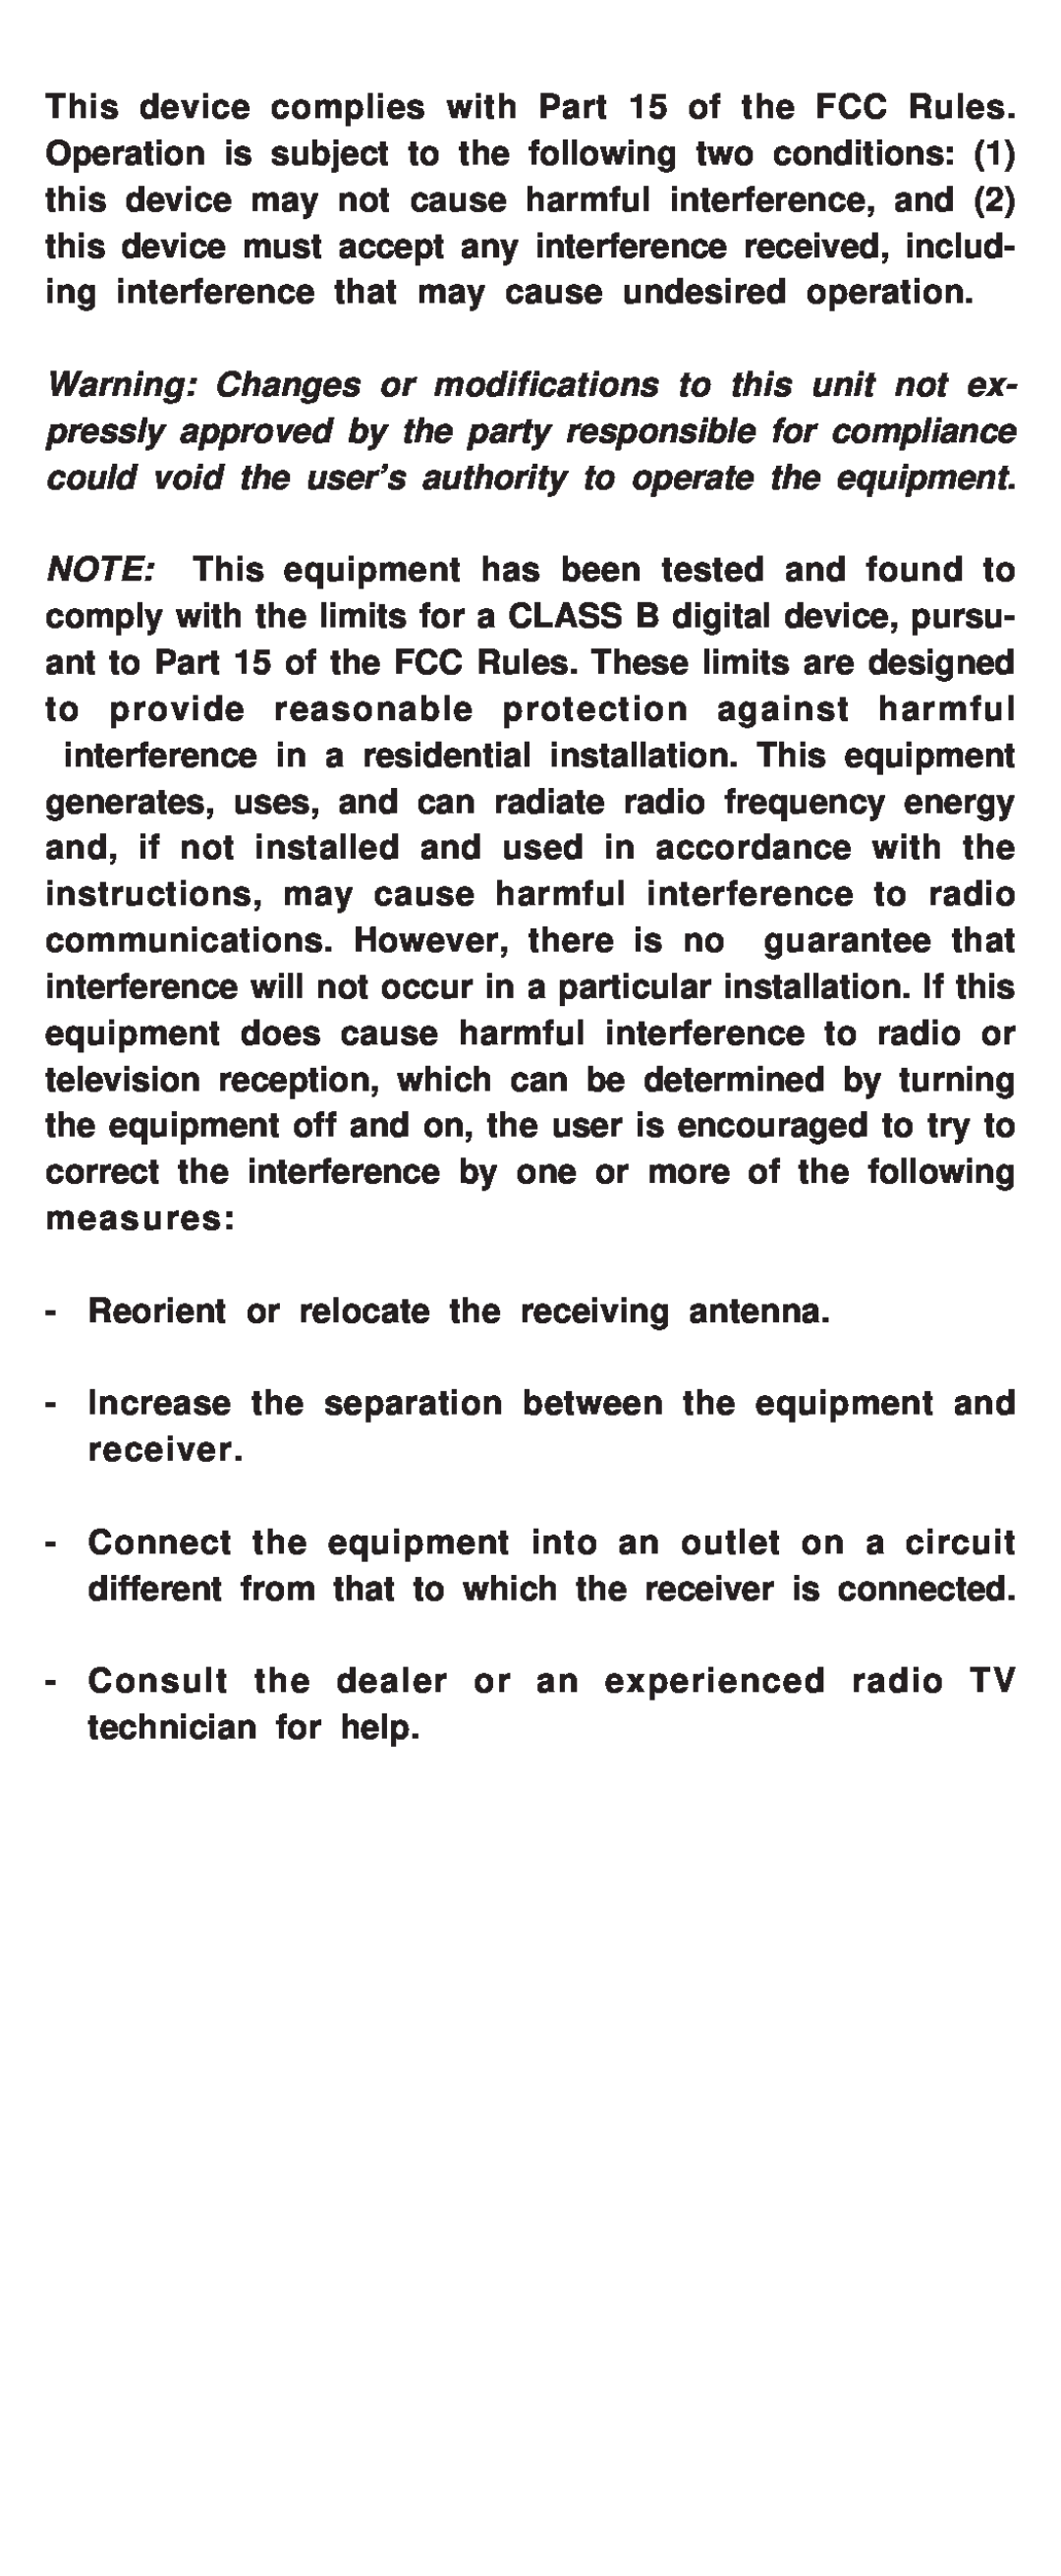 Cortelco 8150 instruction manual Reorient or relocate the receiving antenna 